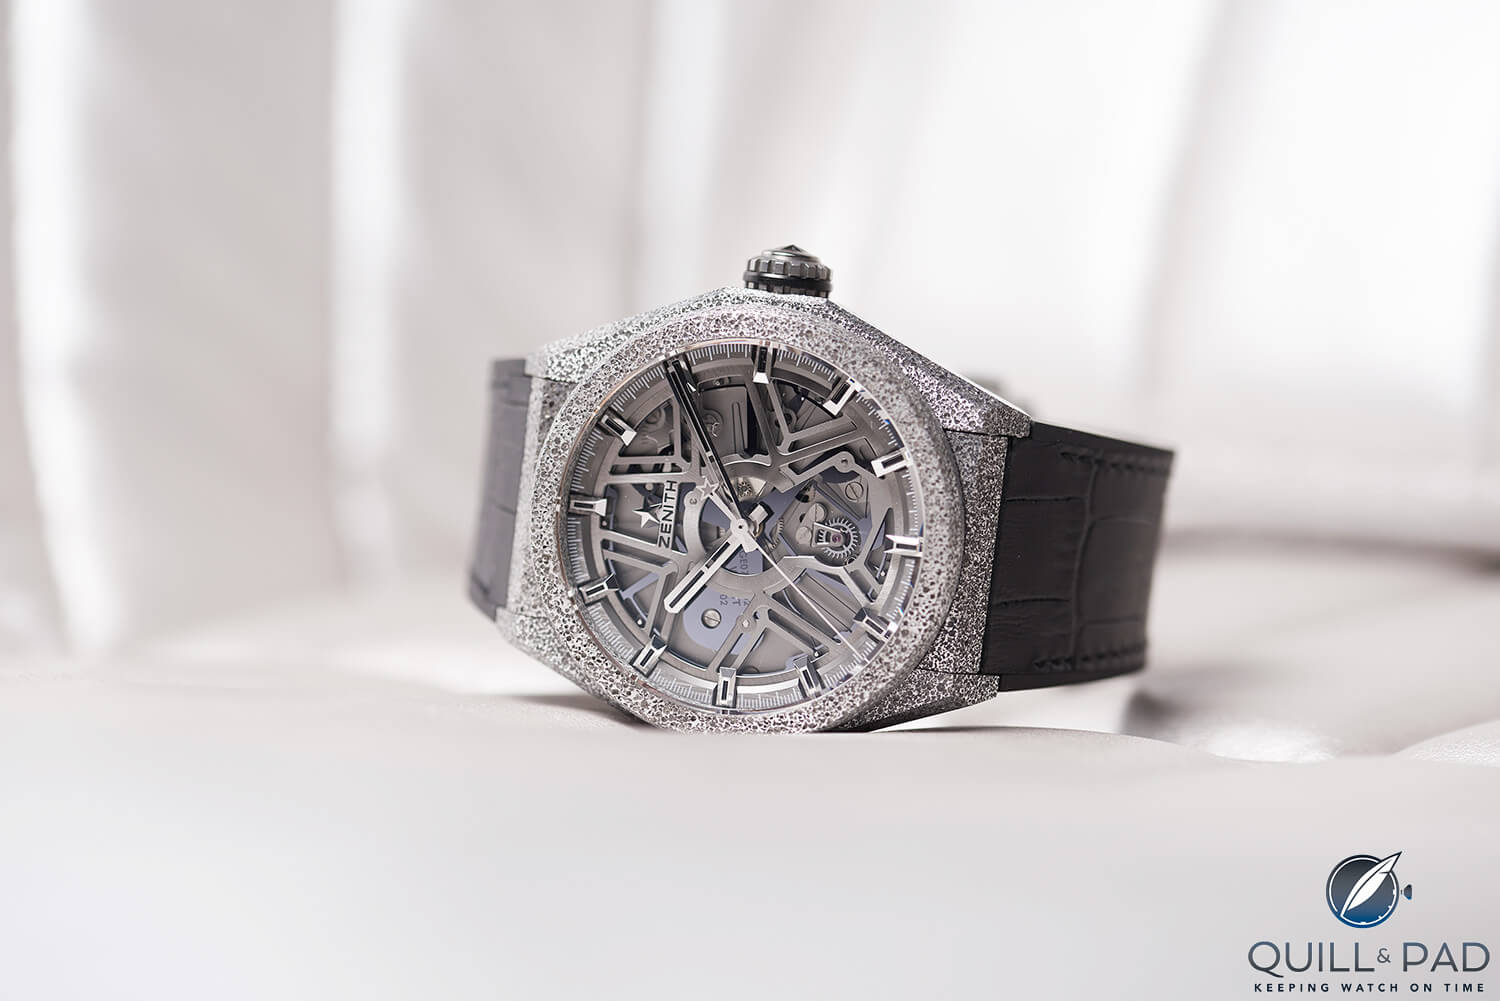 The experimental Zenith Defy Lab was first offered in a set of 10 unique pieces to collectors